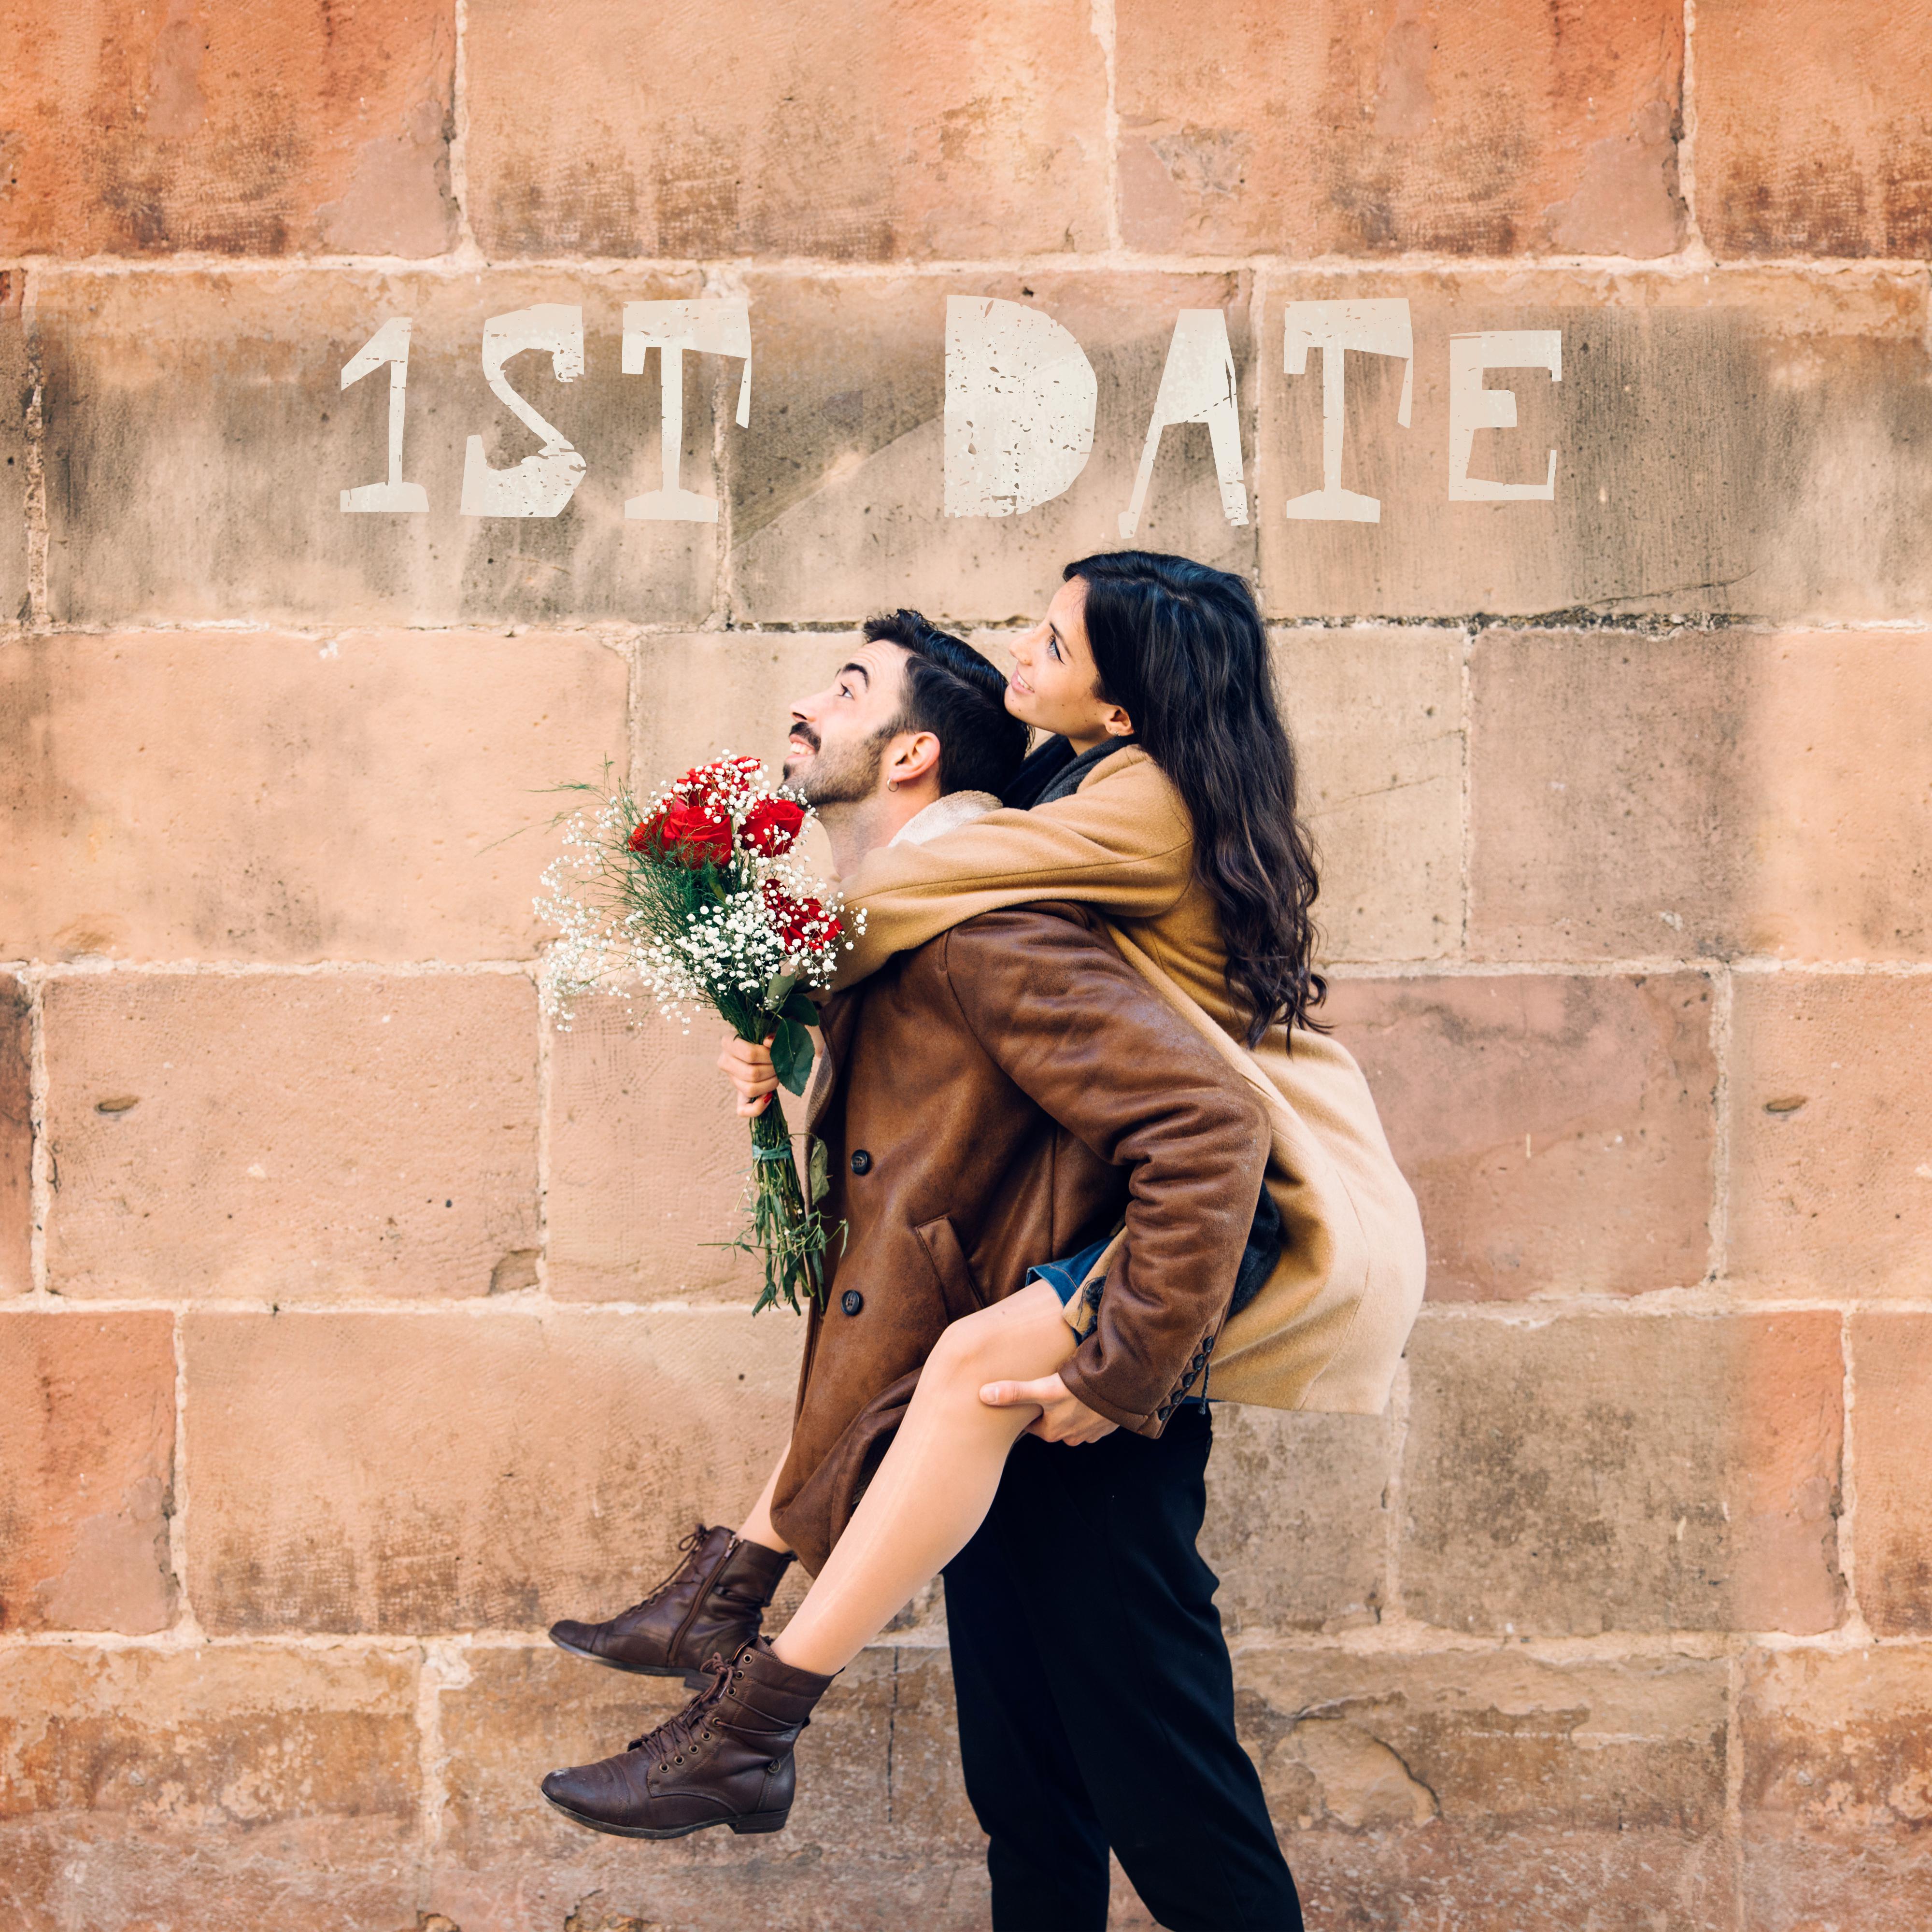 1st Date - Romantic Jazz Background for a Date, Meeting or Dinner with a Loved One